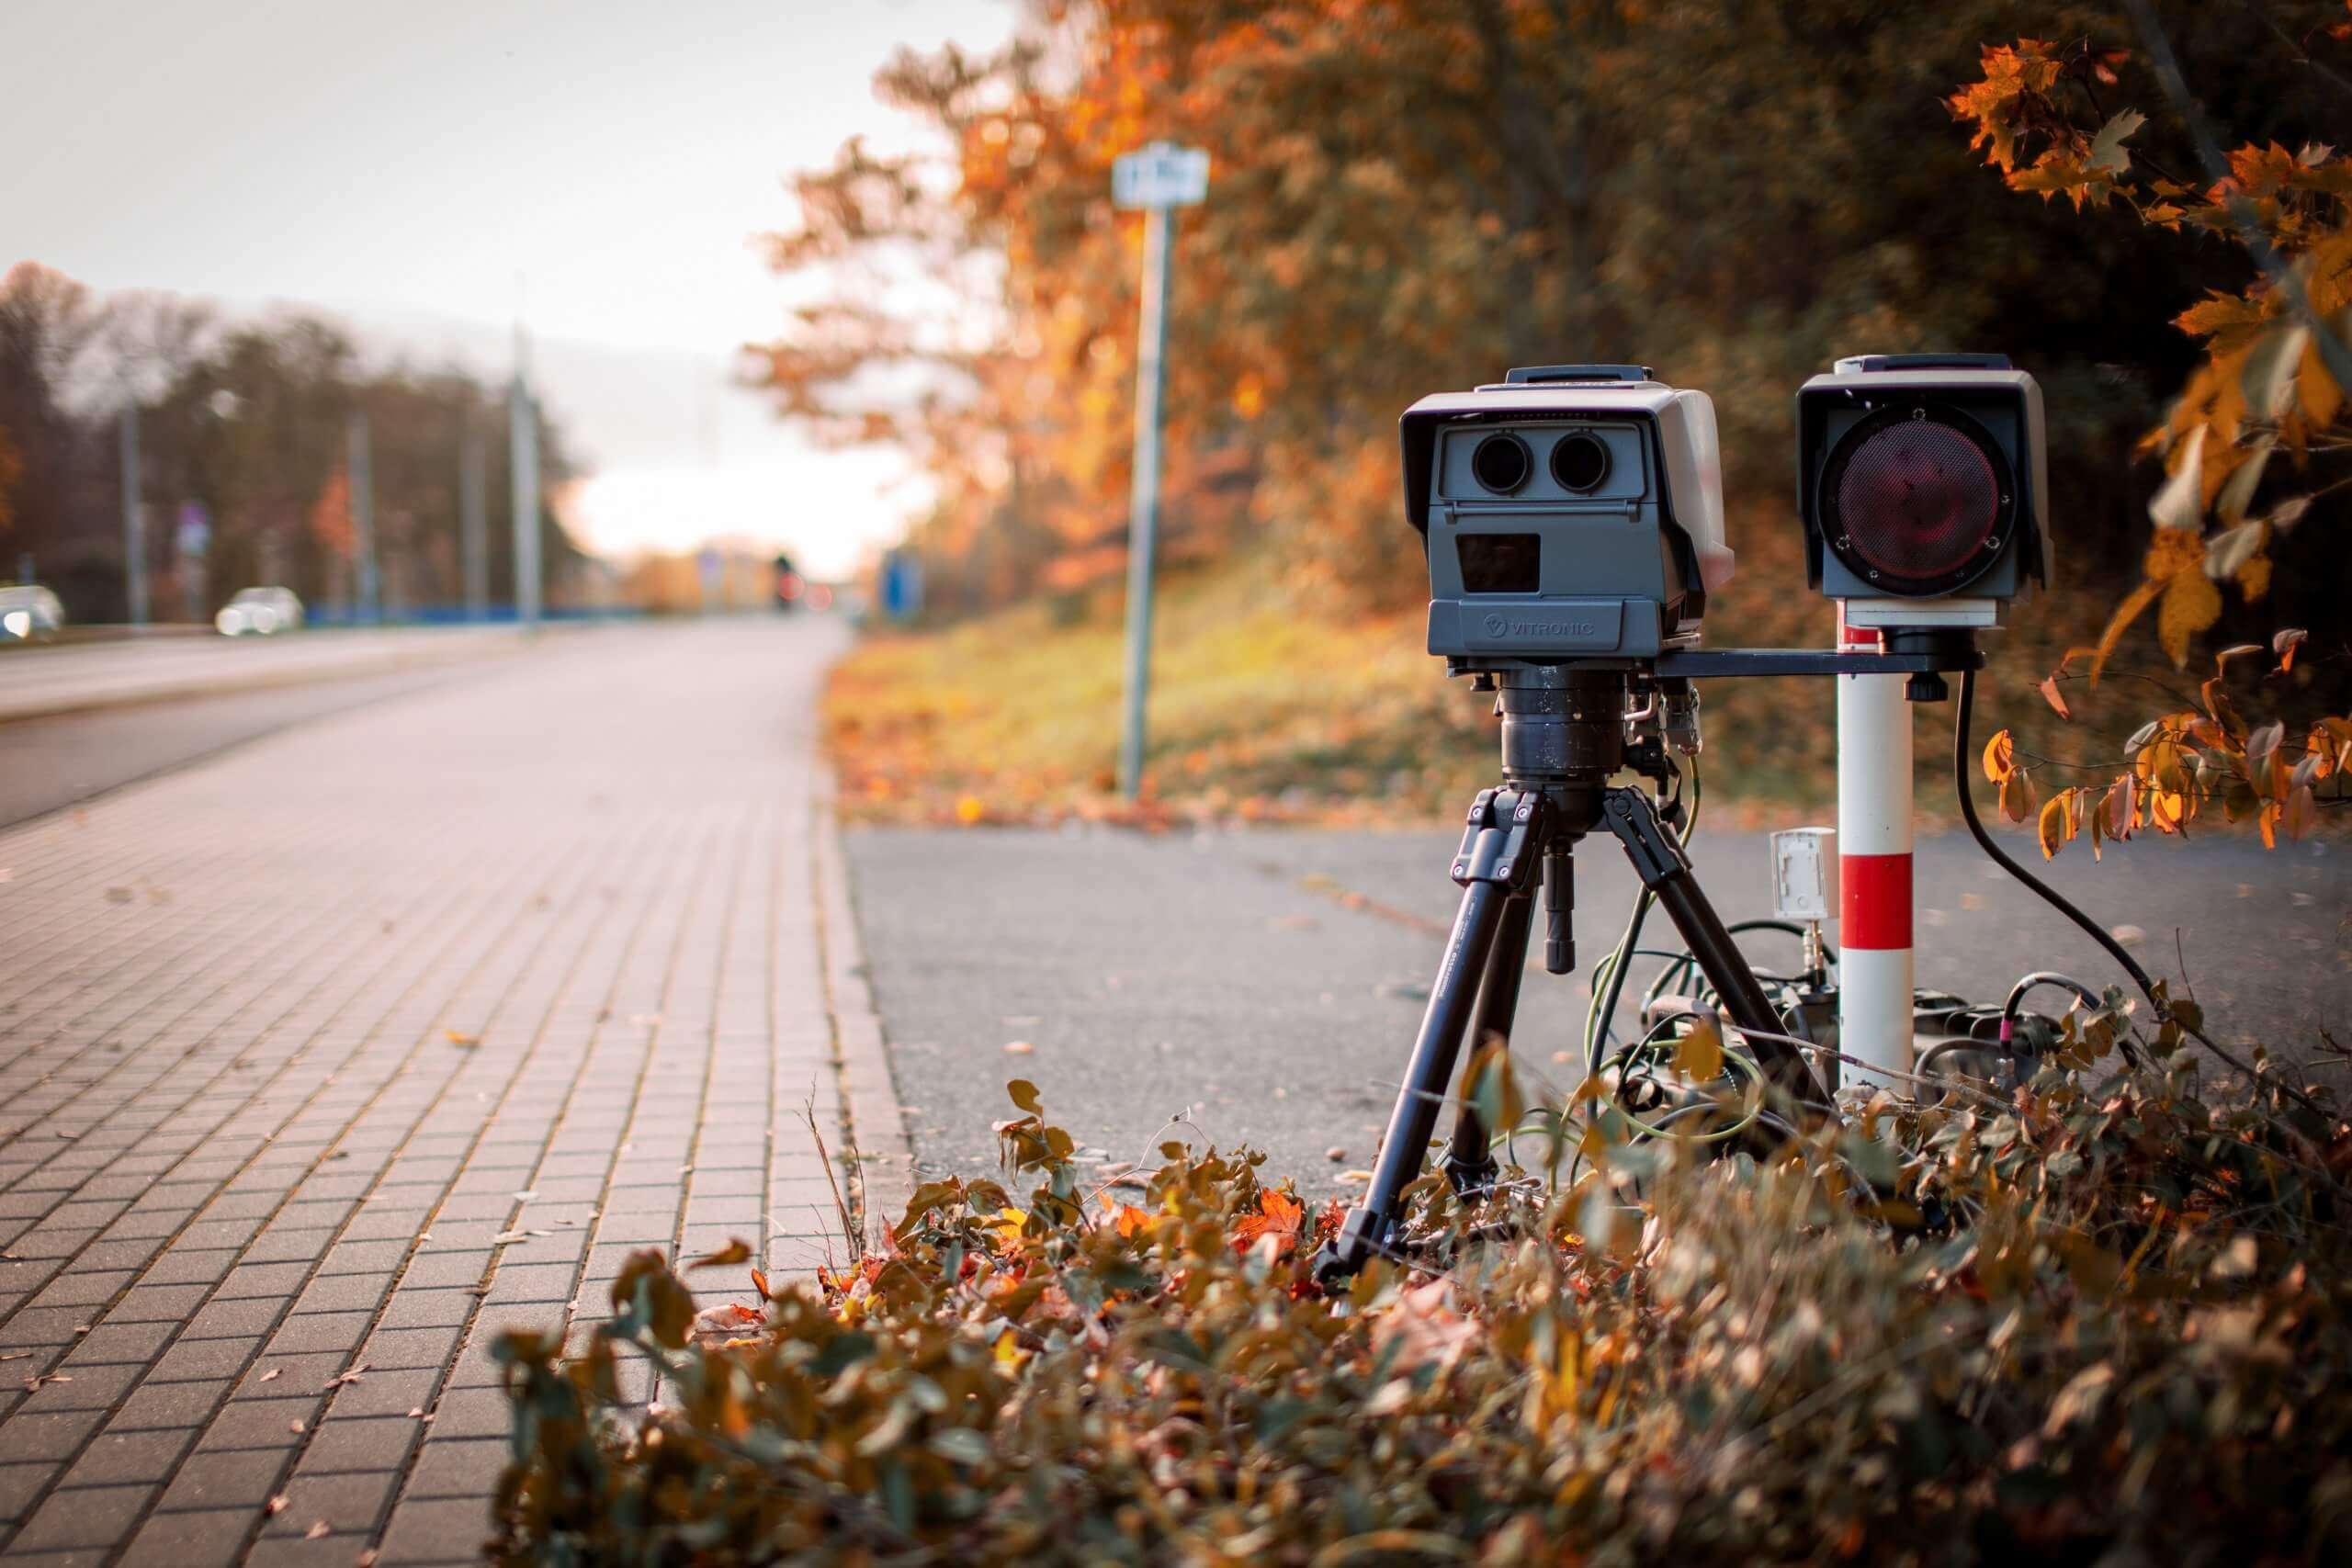 speed camera set up by roadside to catch speeding drivers